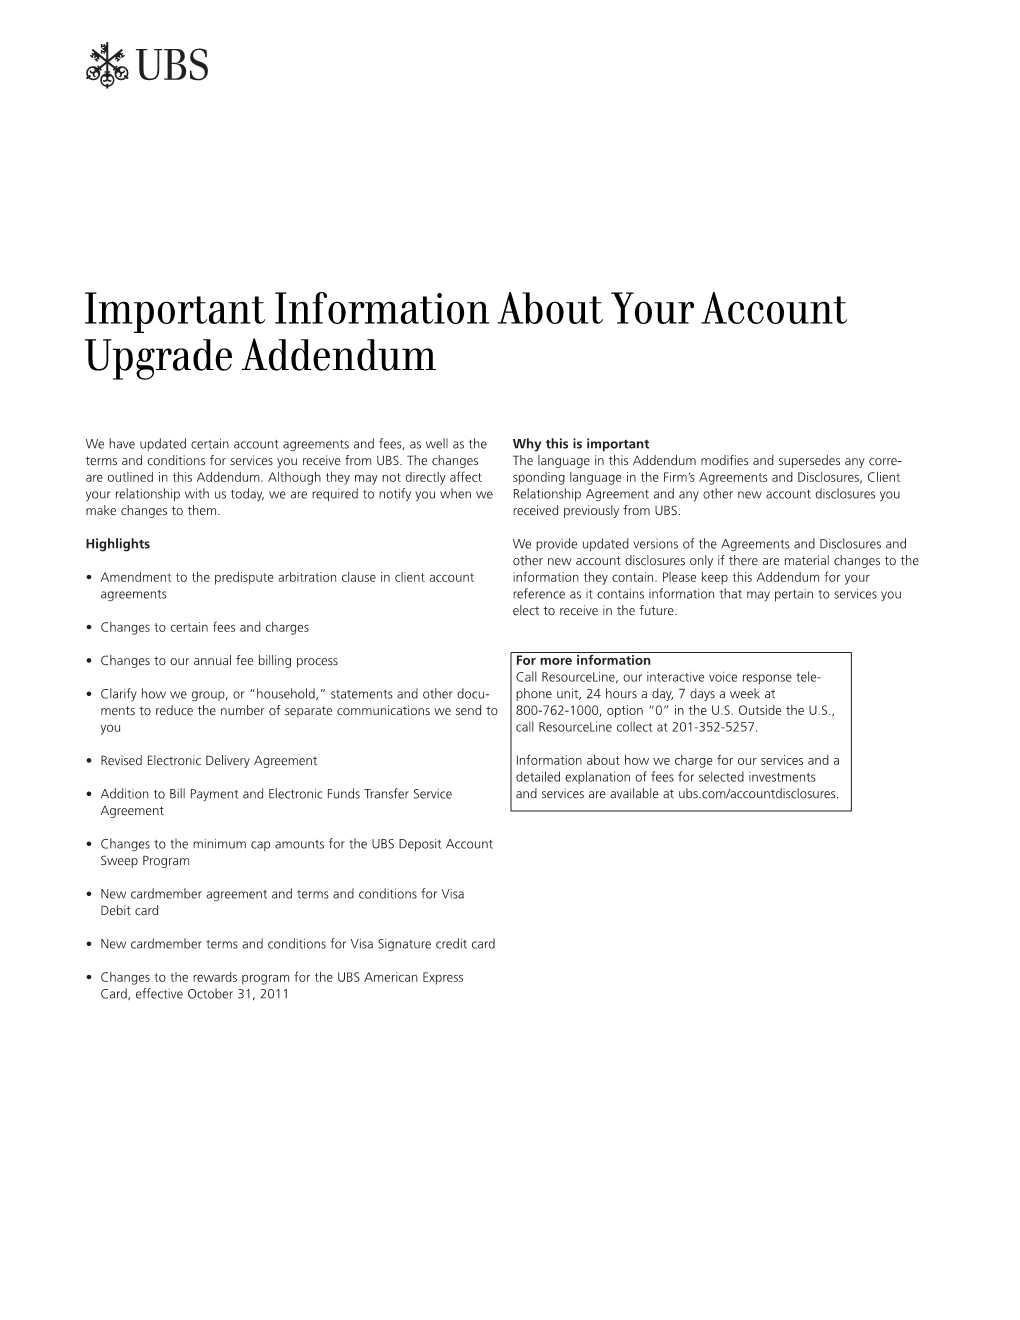 Ab Important Information About Your Account Upgrade Addendum